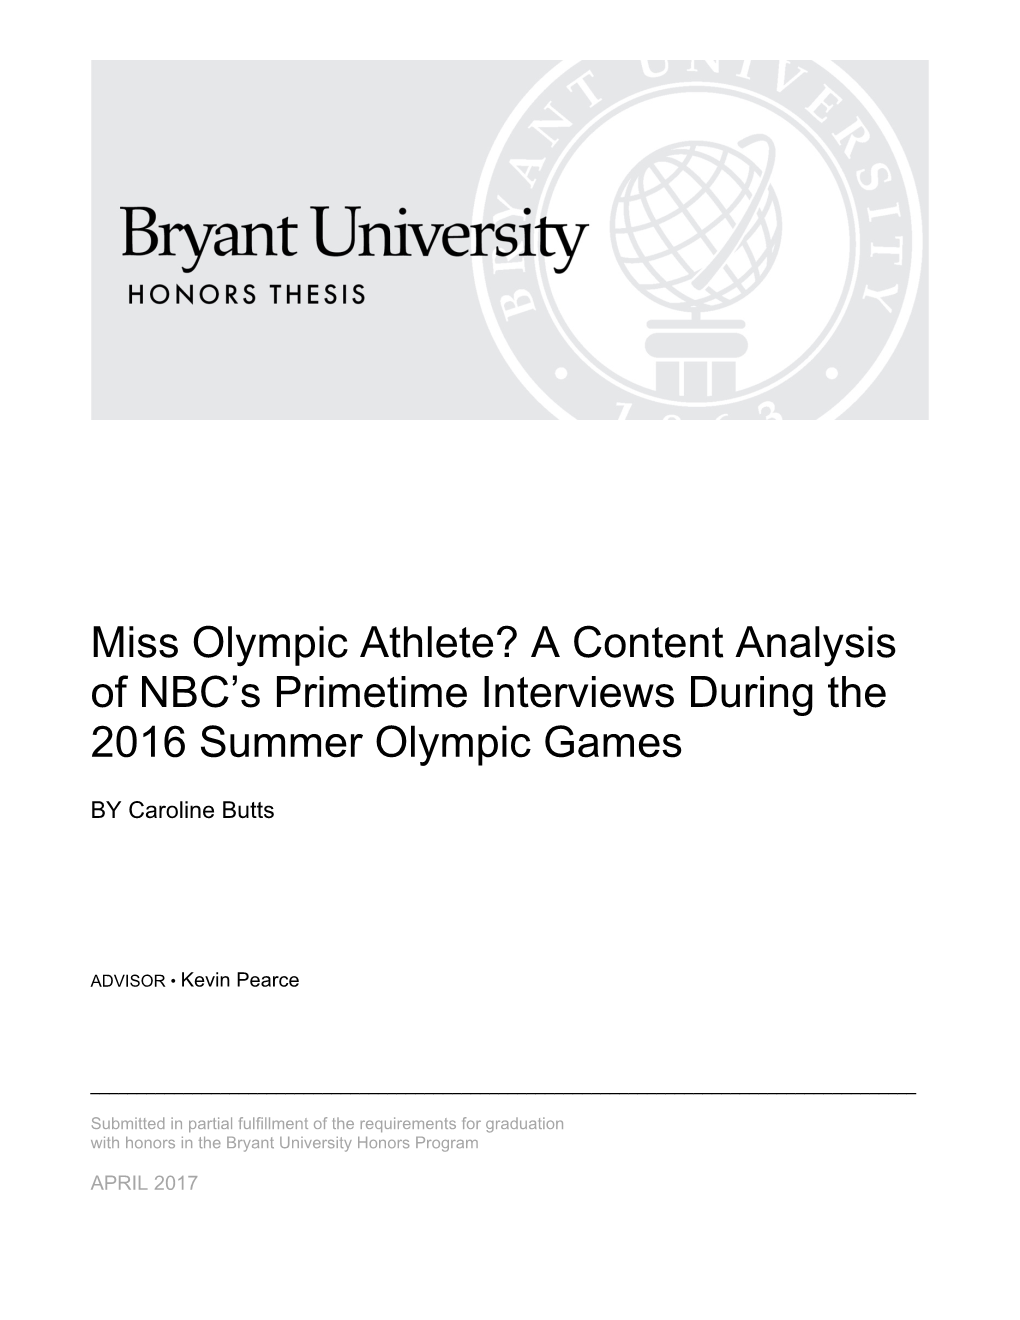 A Content Analysis of Nbcâ•Žs Primetime Interviews During the 2016 Summer Olympic Games